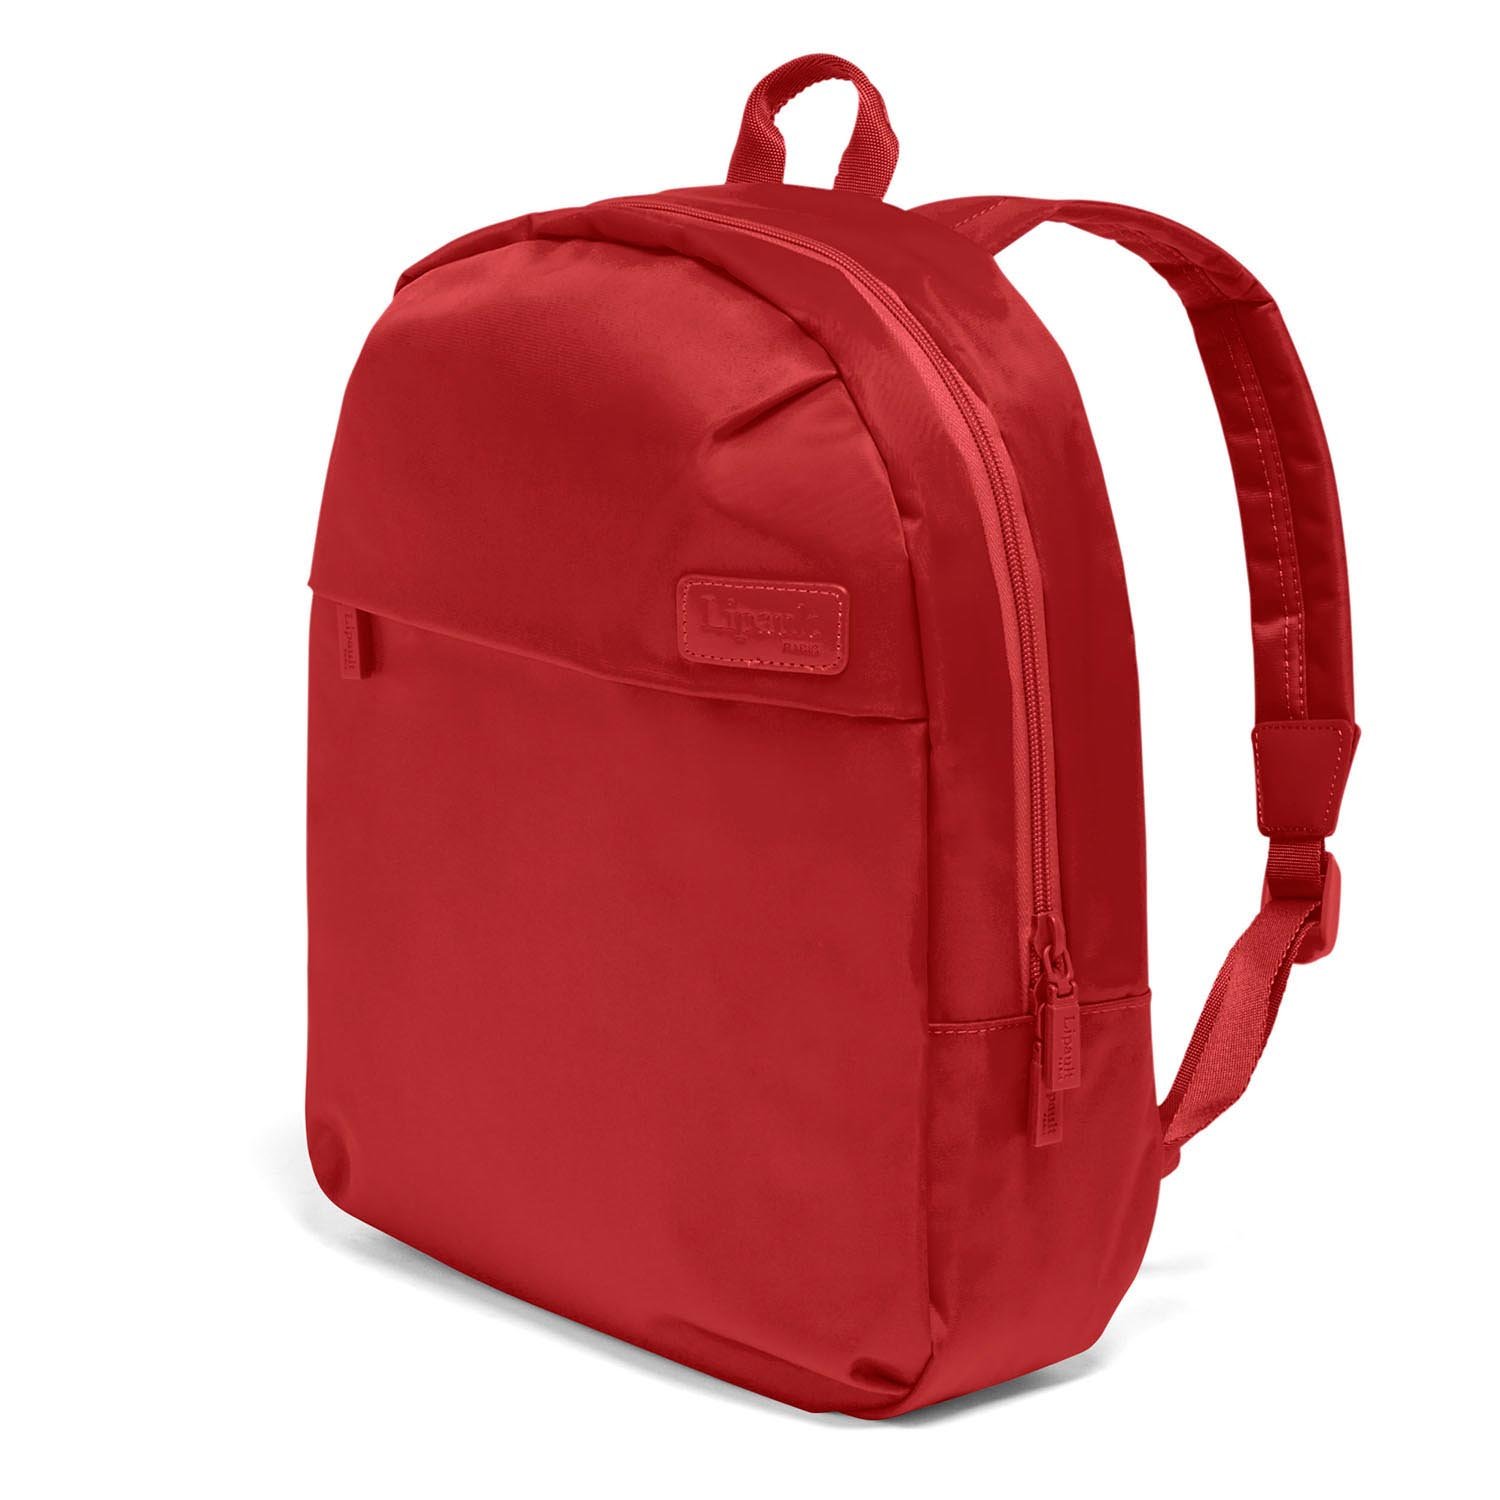 CITY PLUME-BACKPACK M SP61-002-SF000*63